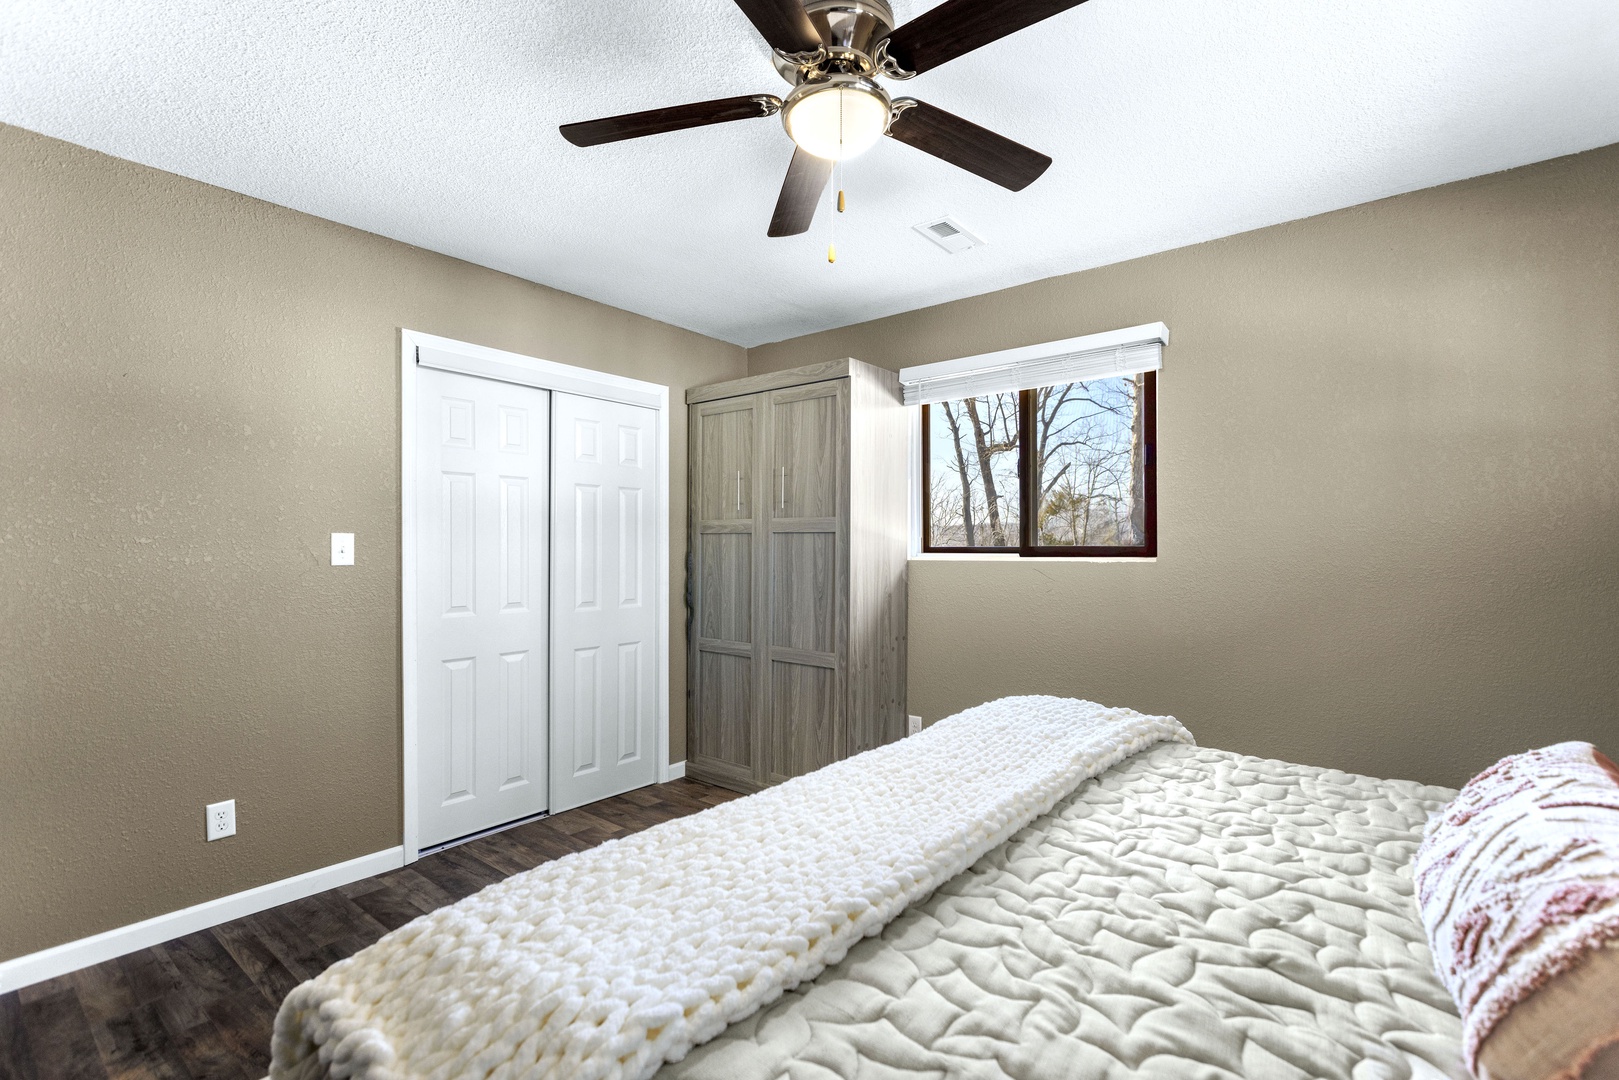 The 1st of 6 spacious bedrooms offers a king bed & twin murphy bed